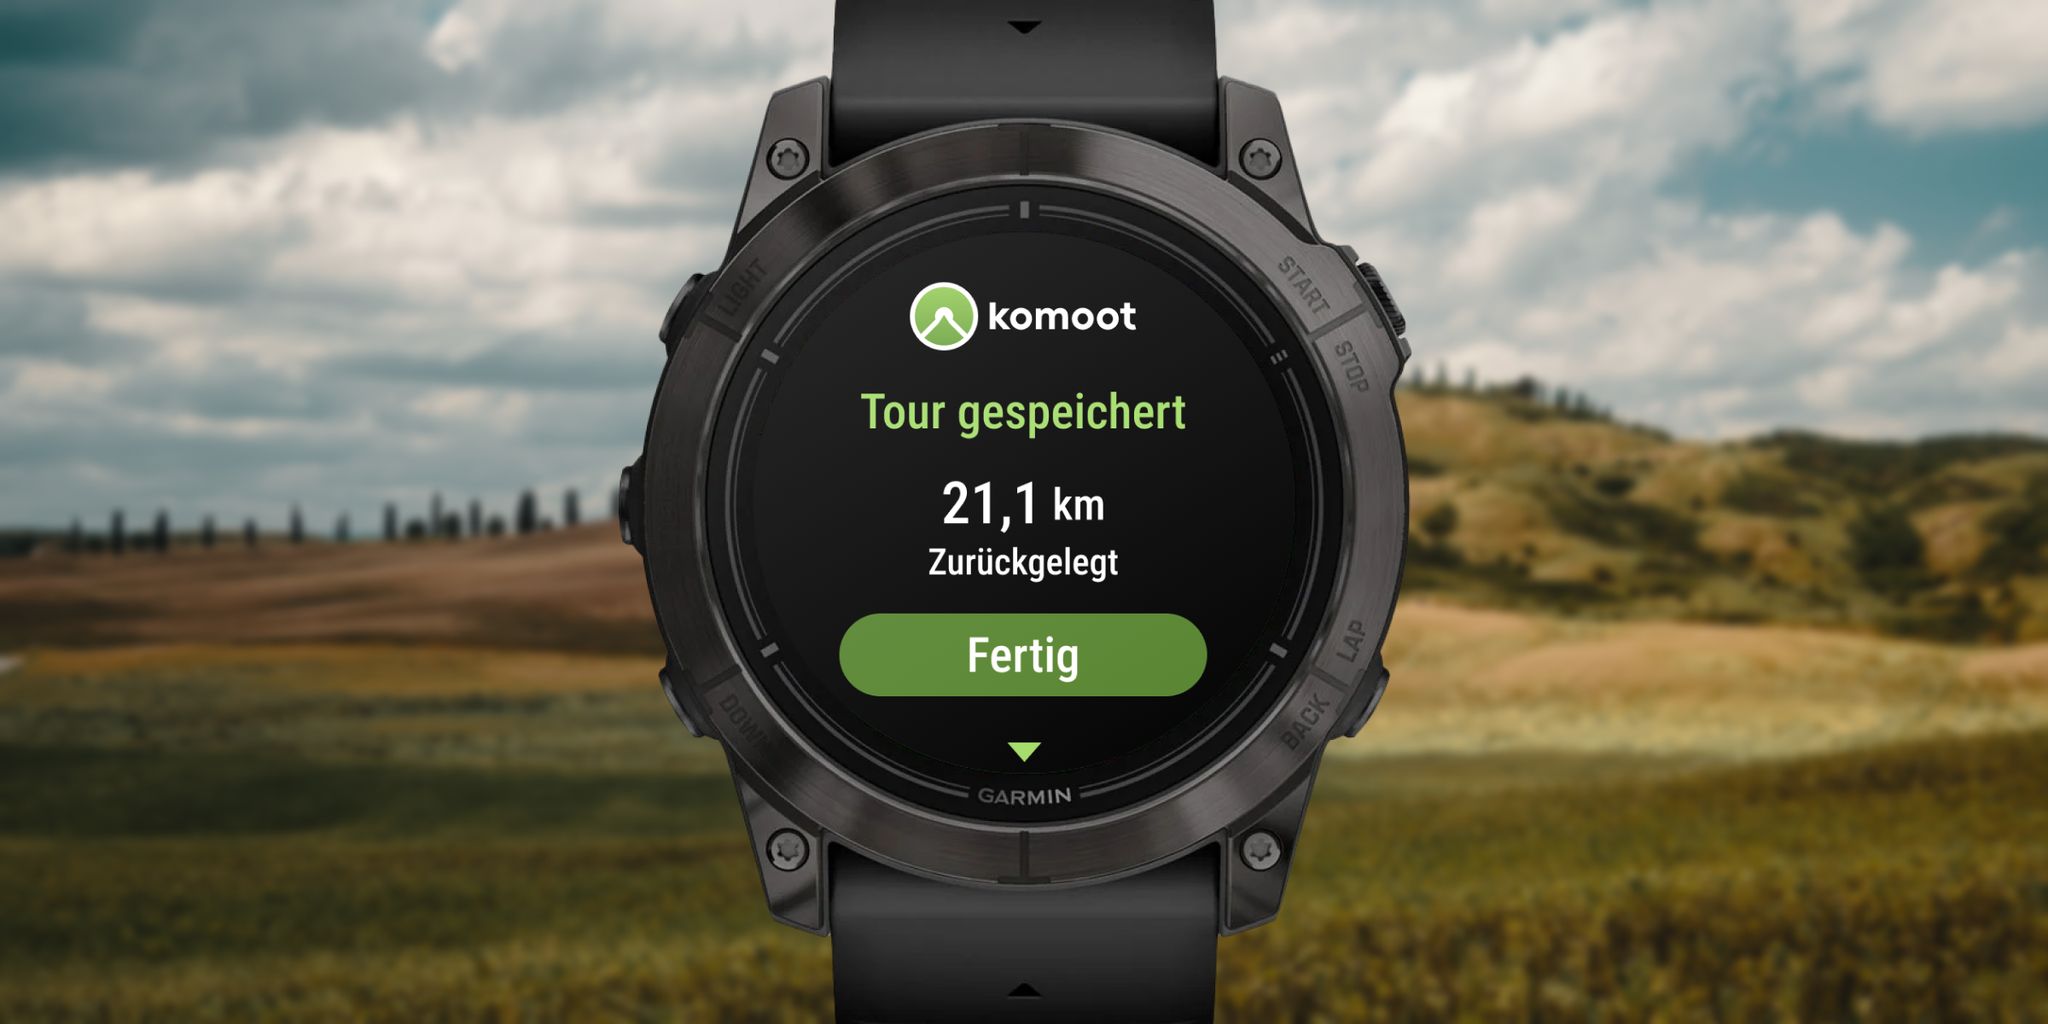 start navigation on your Garmin device right in the komoot App on your phone